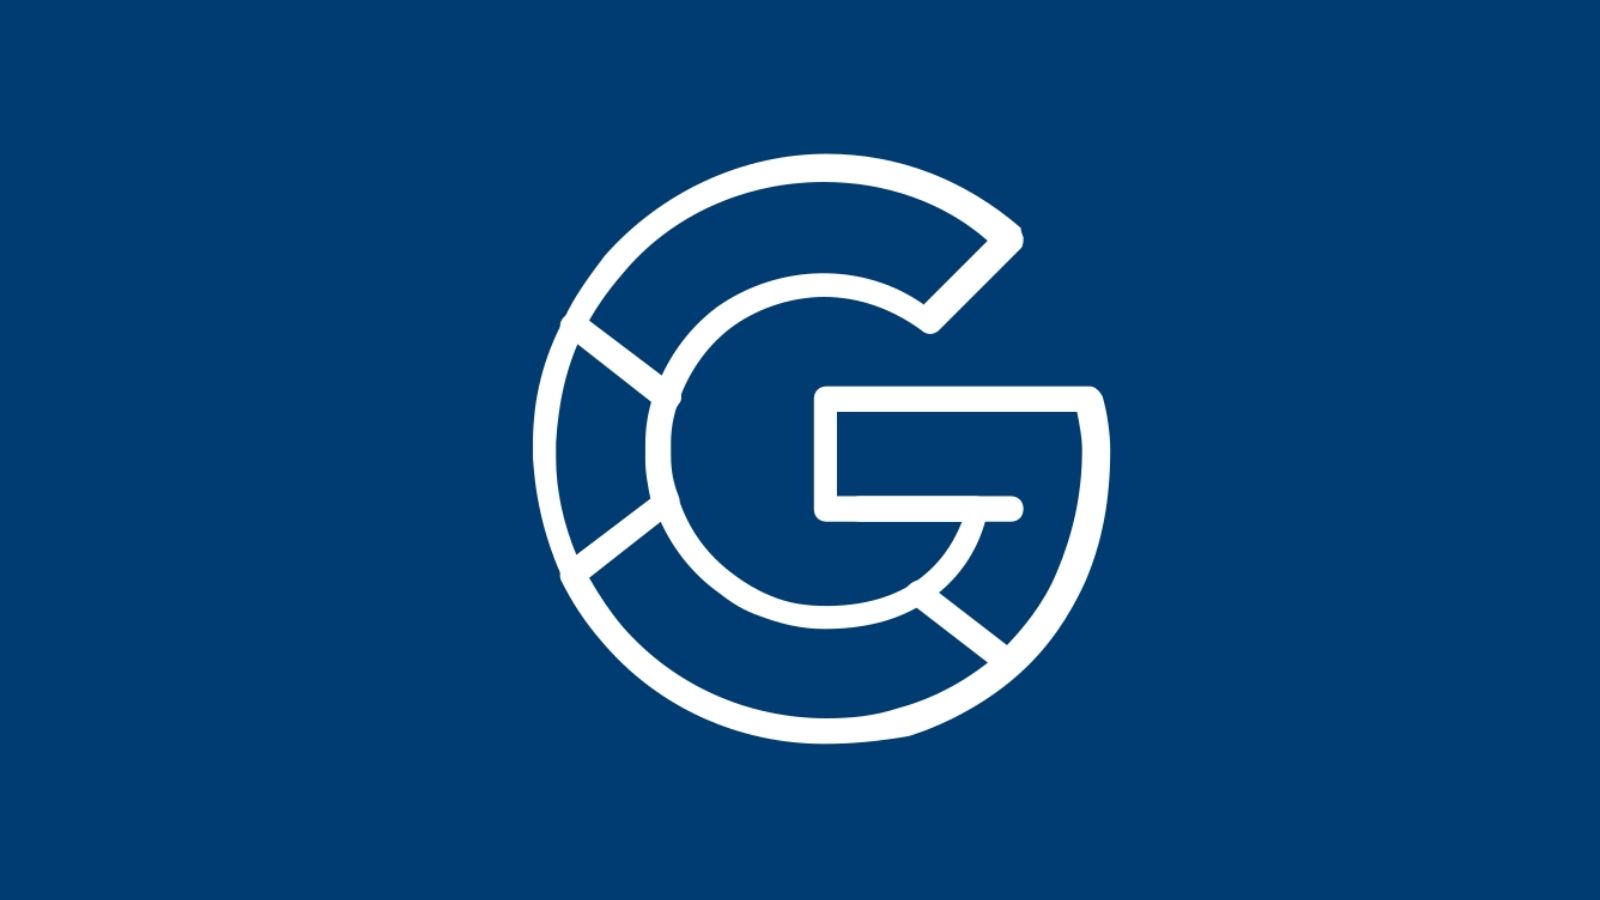 Google icon outlined in white on dark blue background.